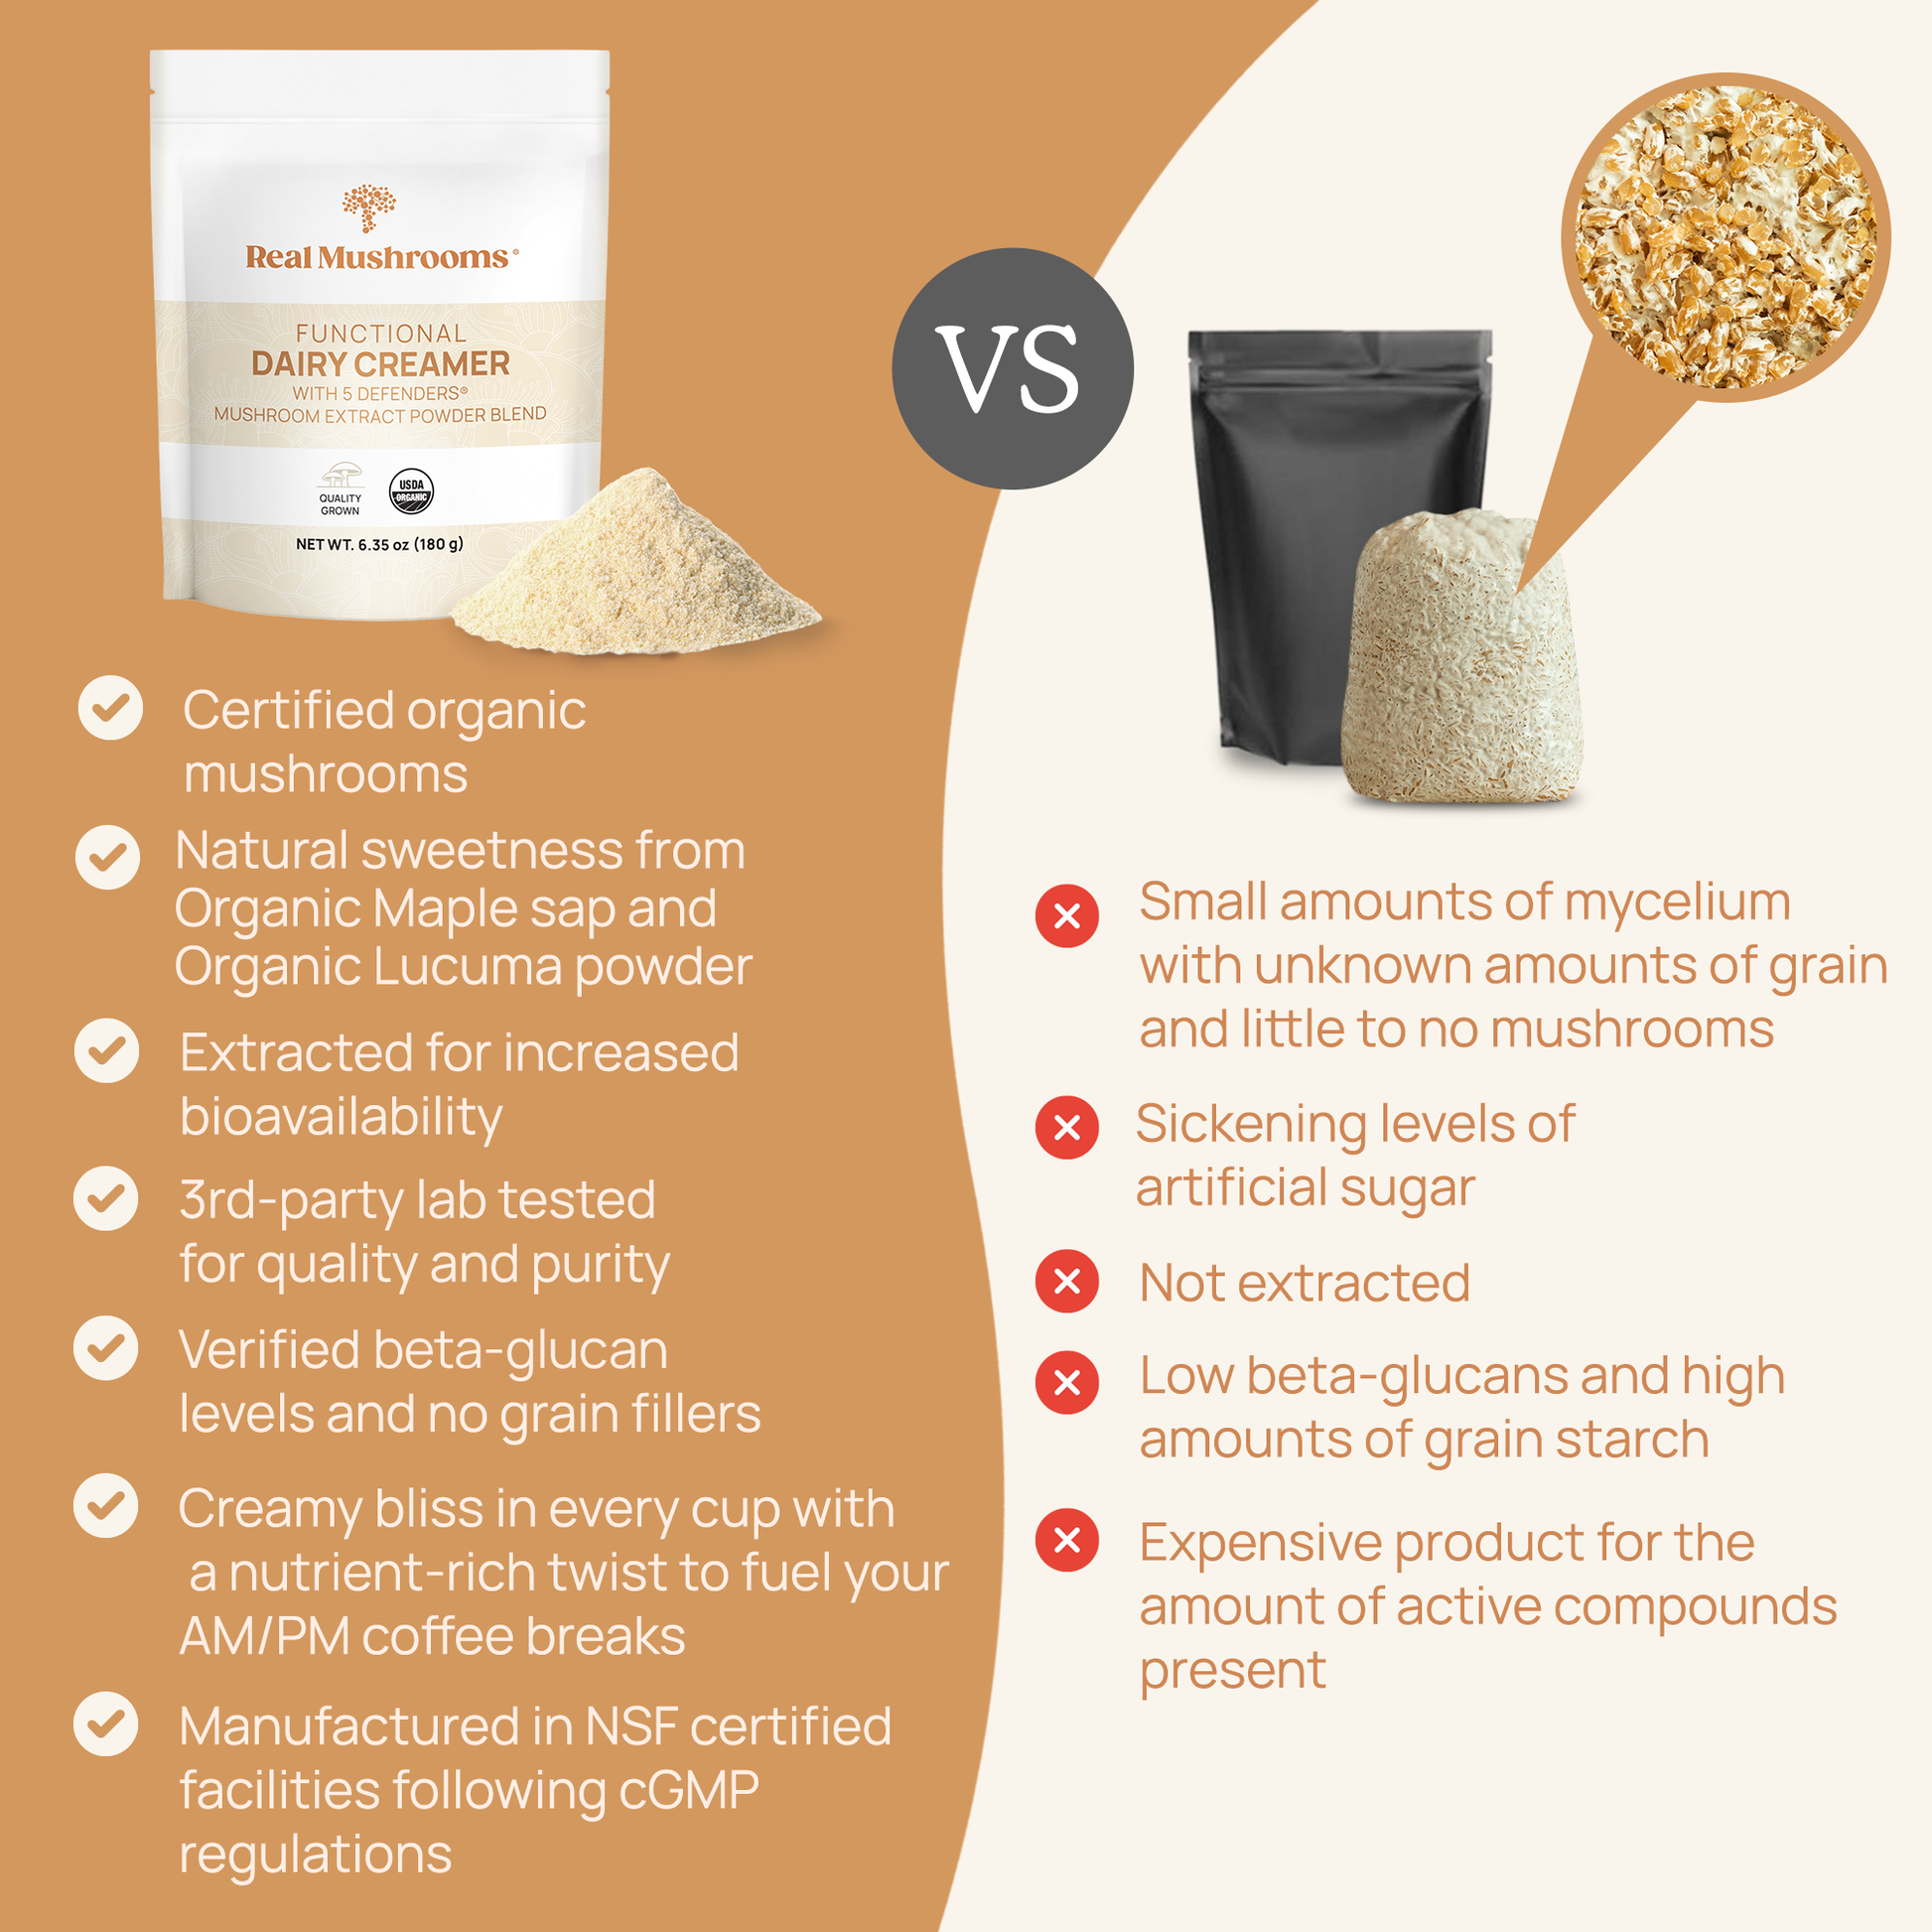 Comparison image showing two types of sweeteners: Real Mushrooms Functional Dairy Creamer Powder and artificial sweetener, highlighting their features and benefits against each other.